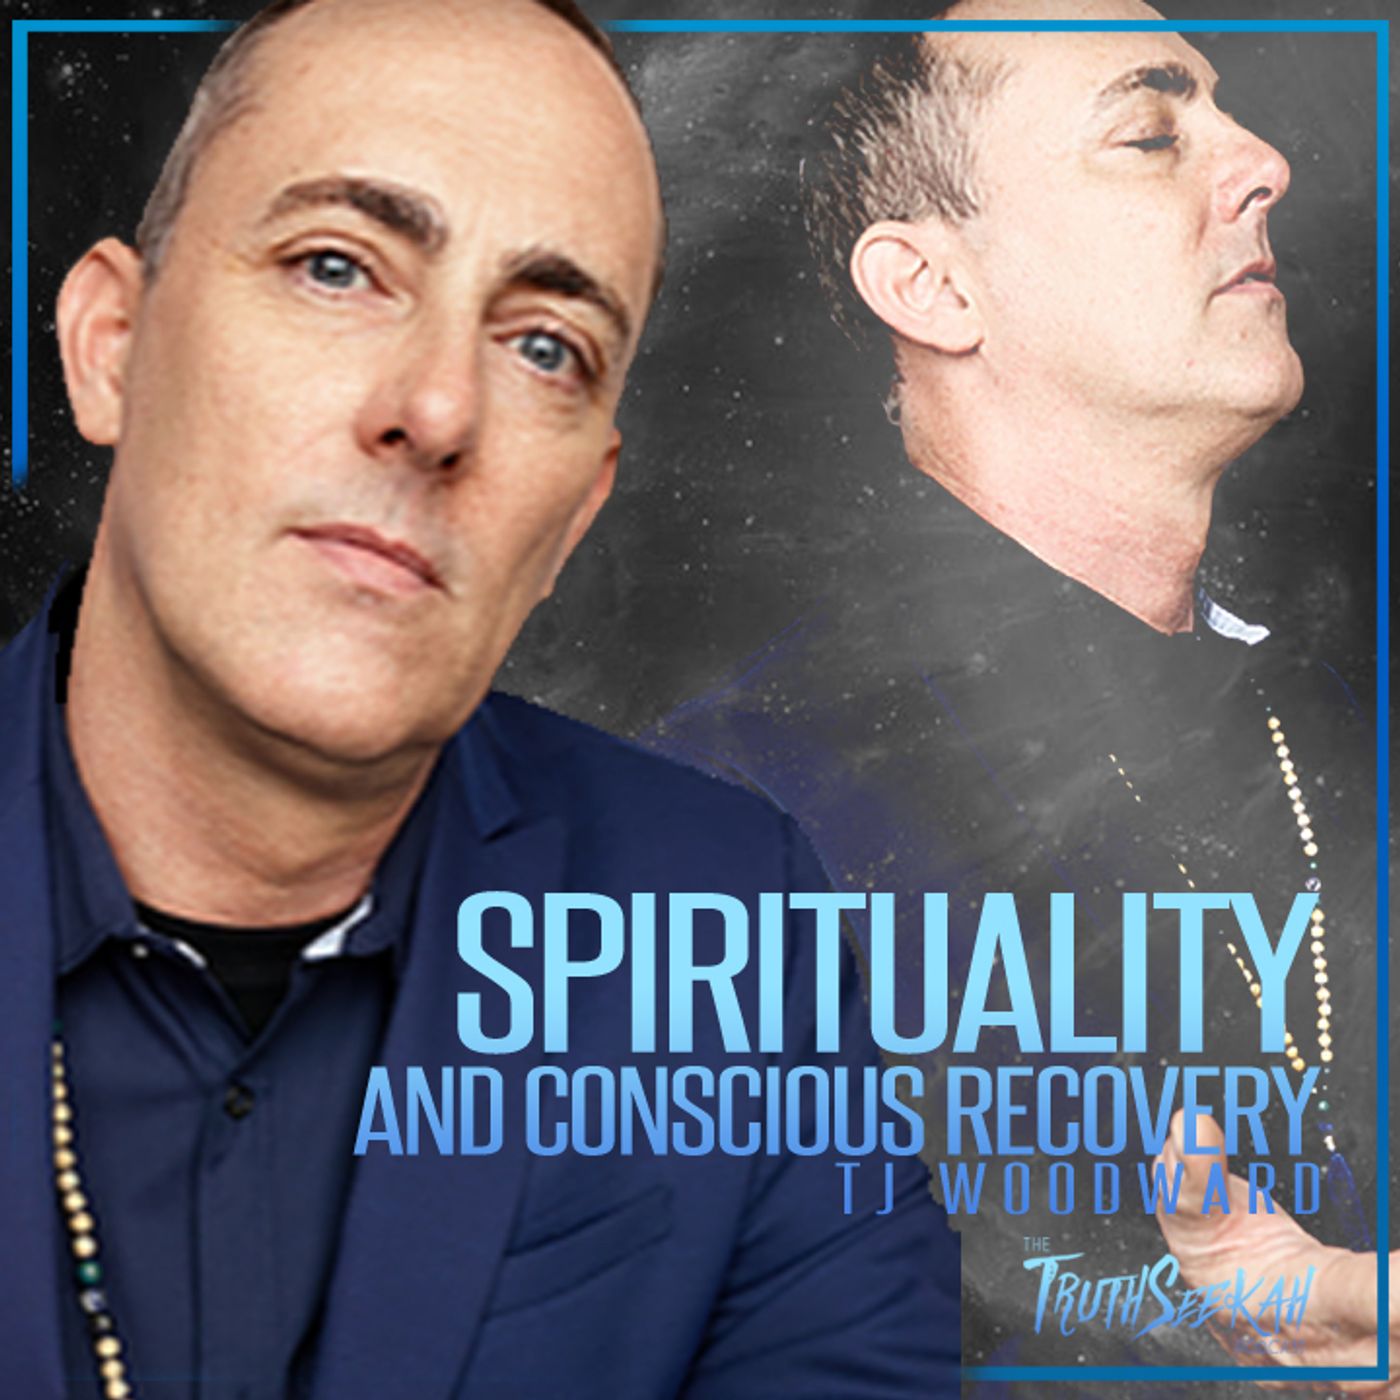 Spirituality and Conscious Recovery | TJ Woodward